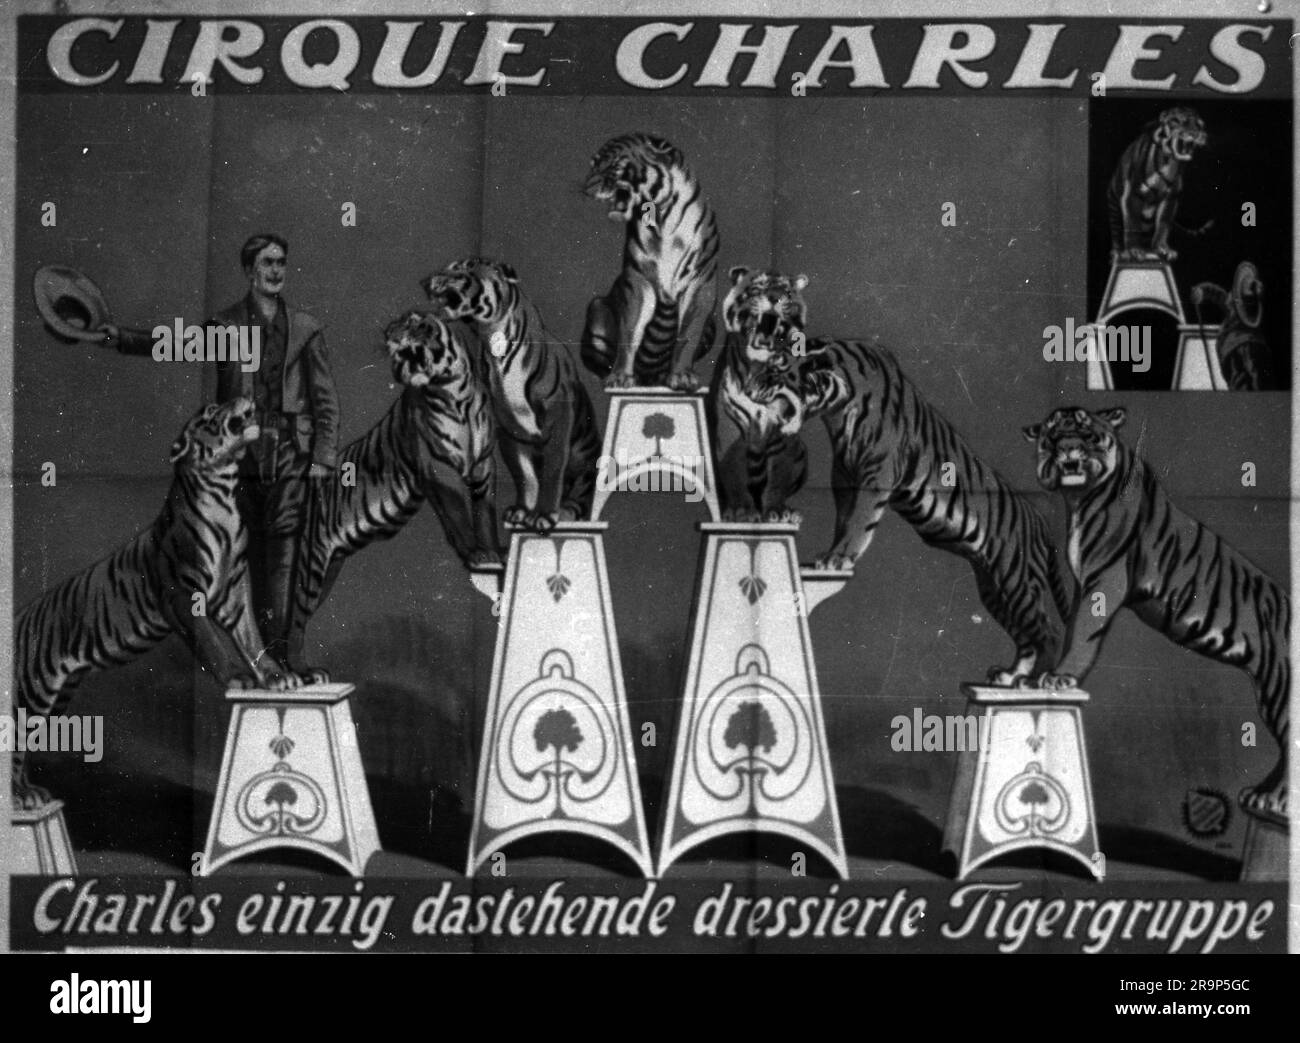 circus, Cirque Charles, advertising poster, circa 1900, ADDITIONAL-RIGHTS-CLEARANCE-INFO-NOT-AVAILABLE Stock Photo